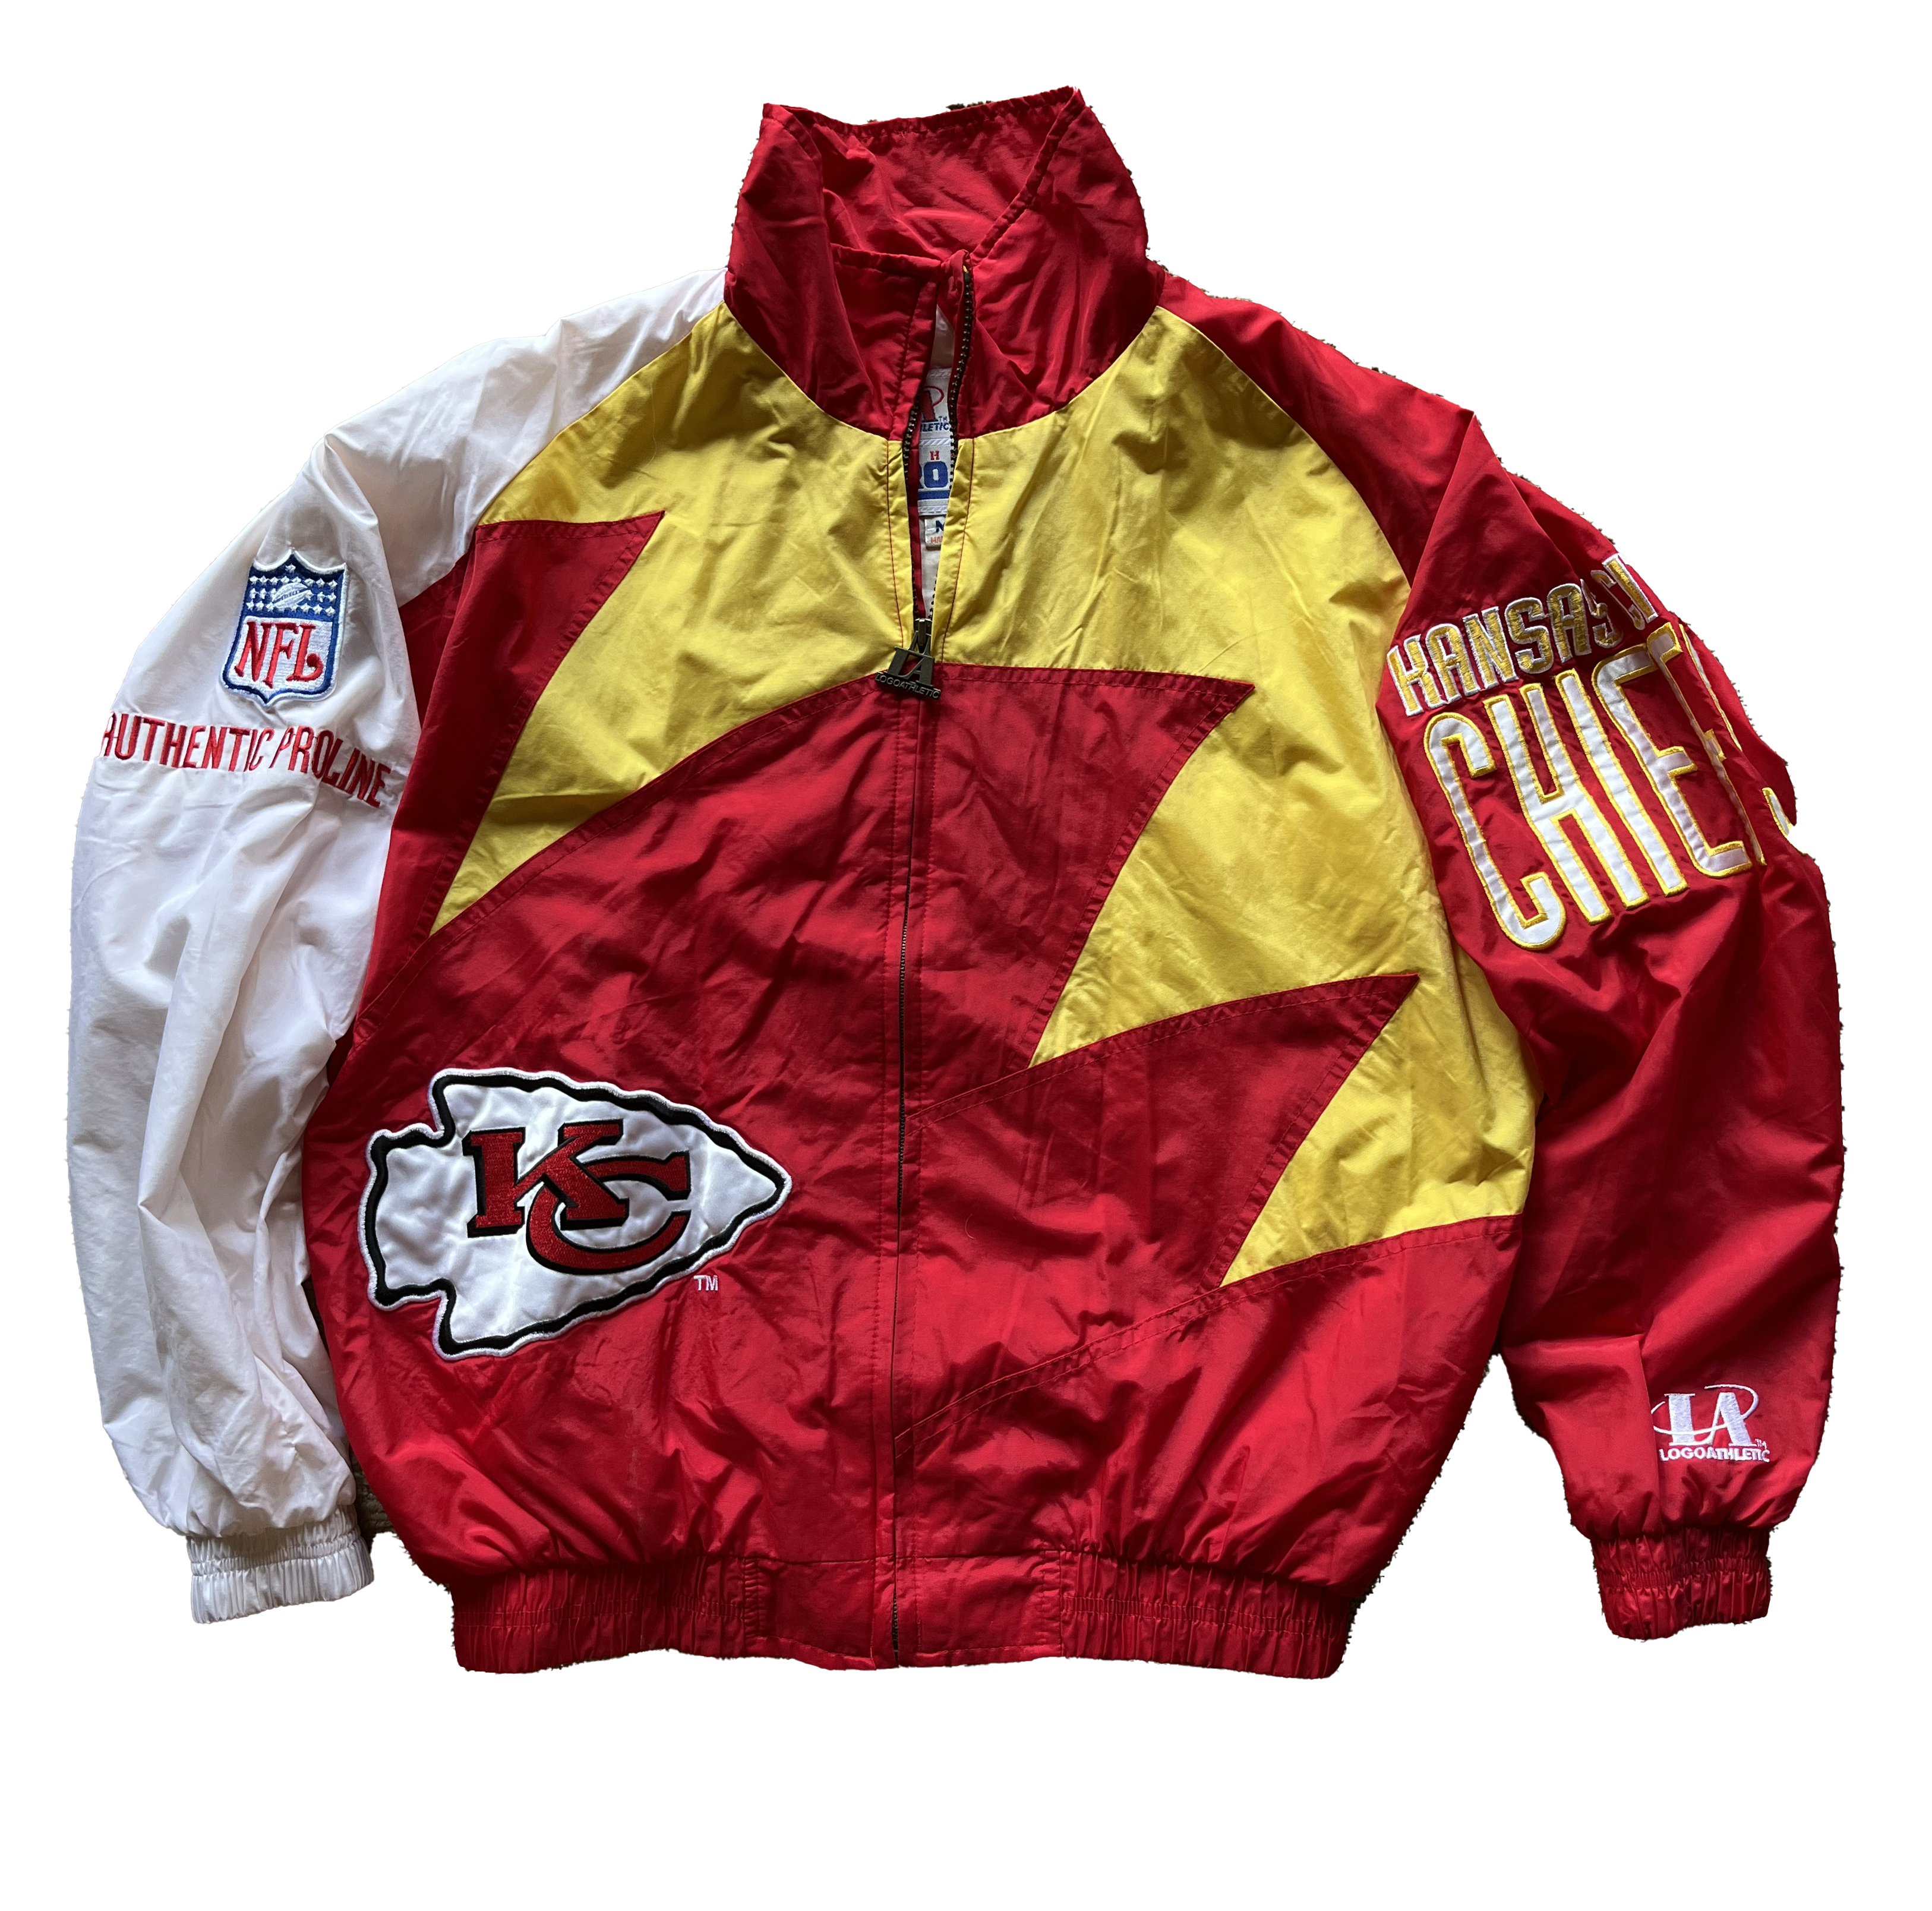 Chiefs Windbreaker at a Sporting Event